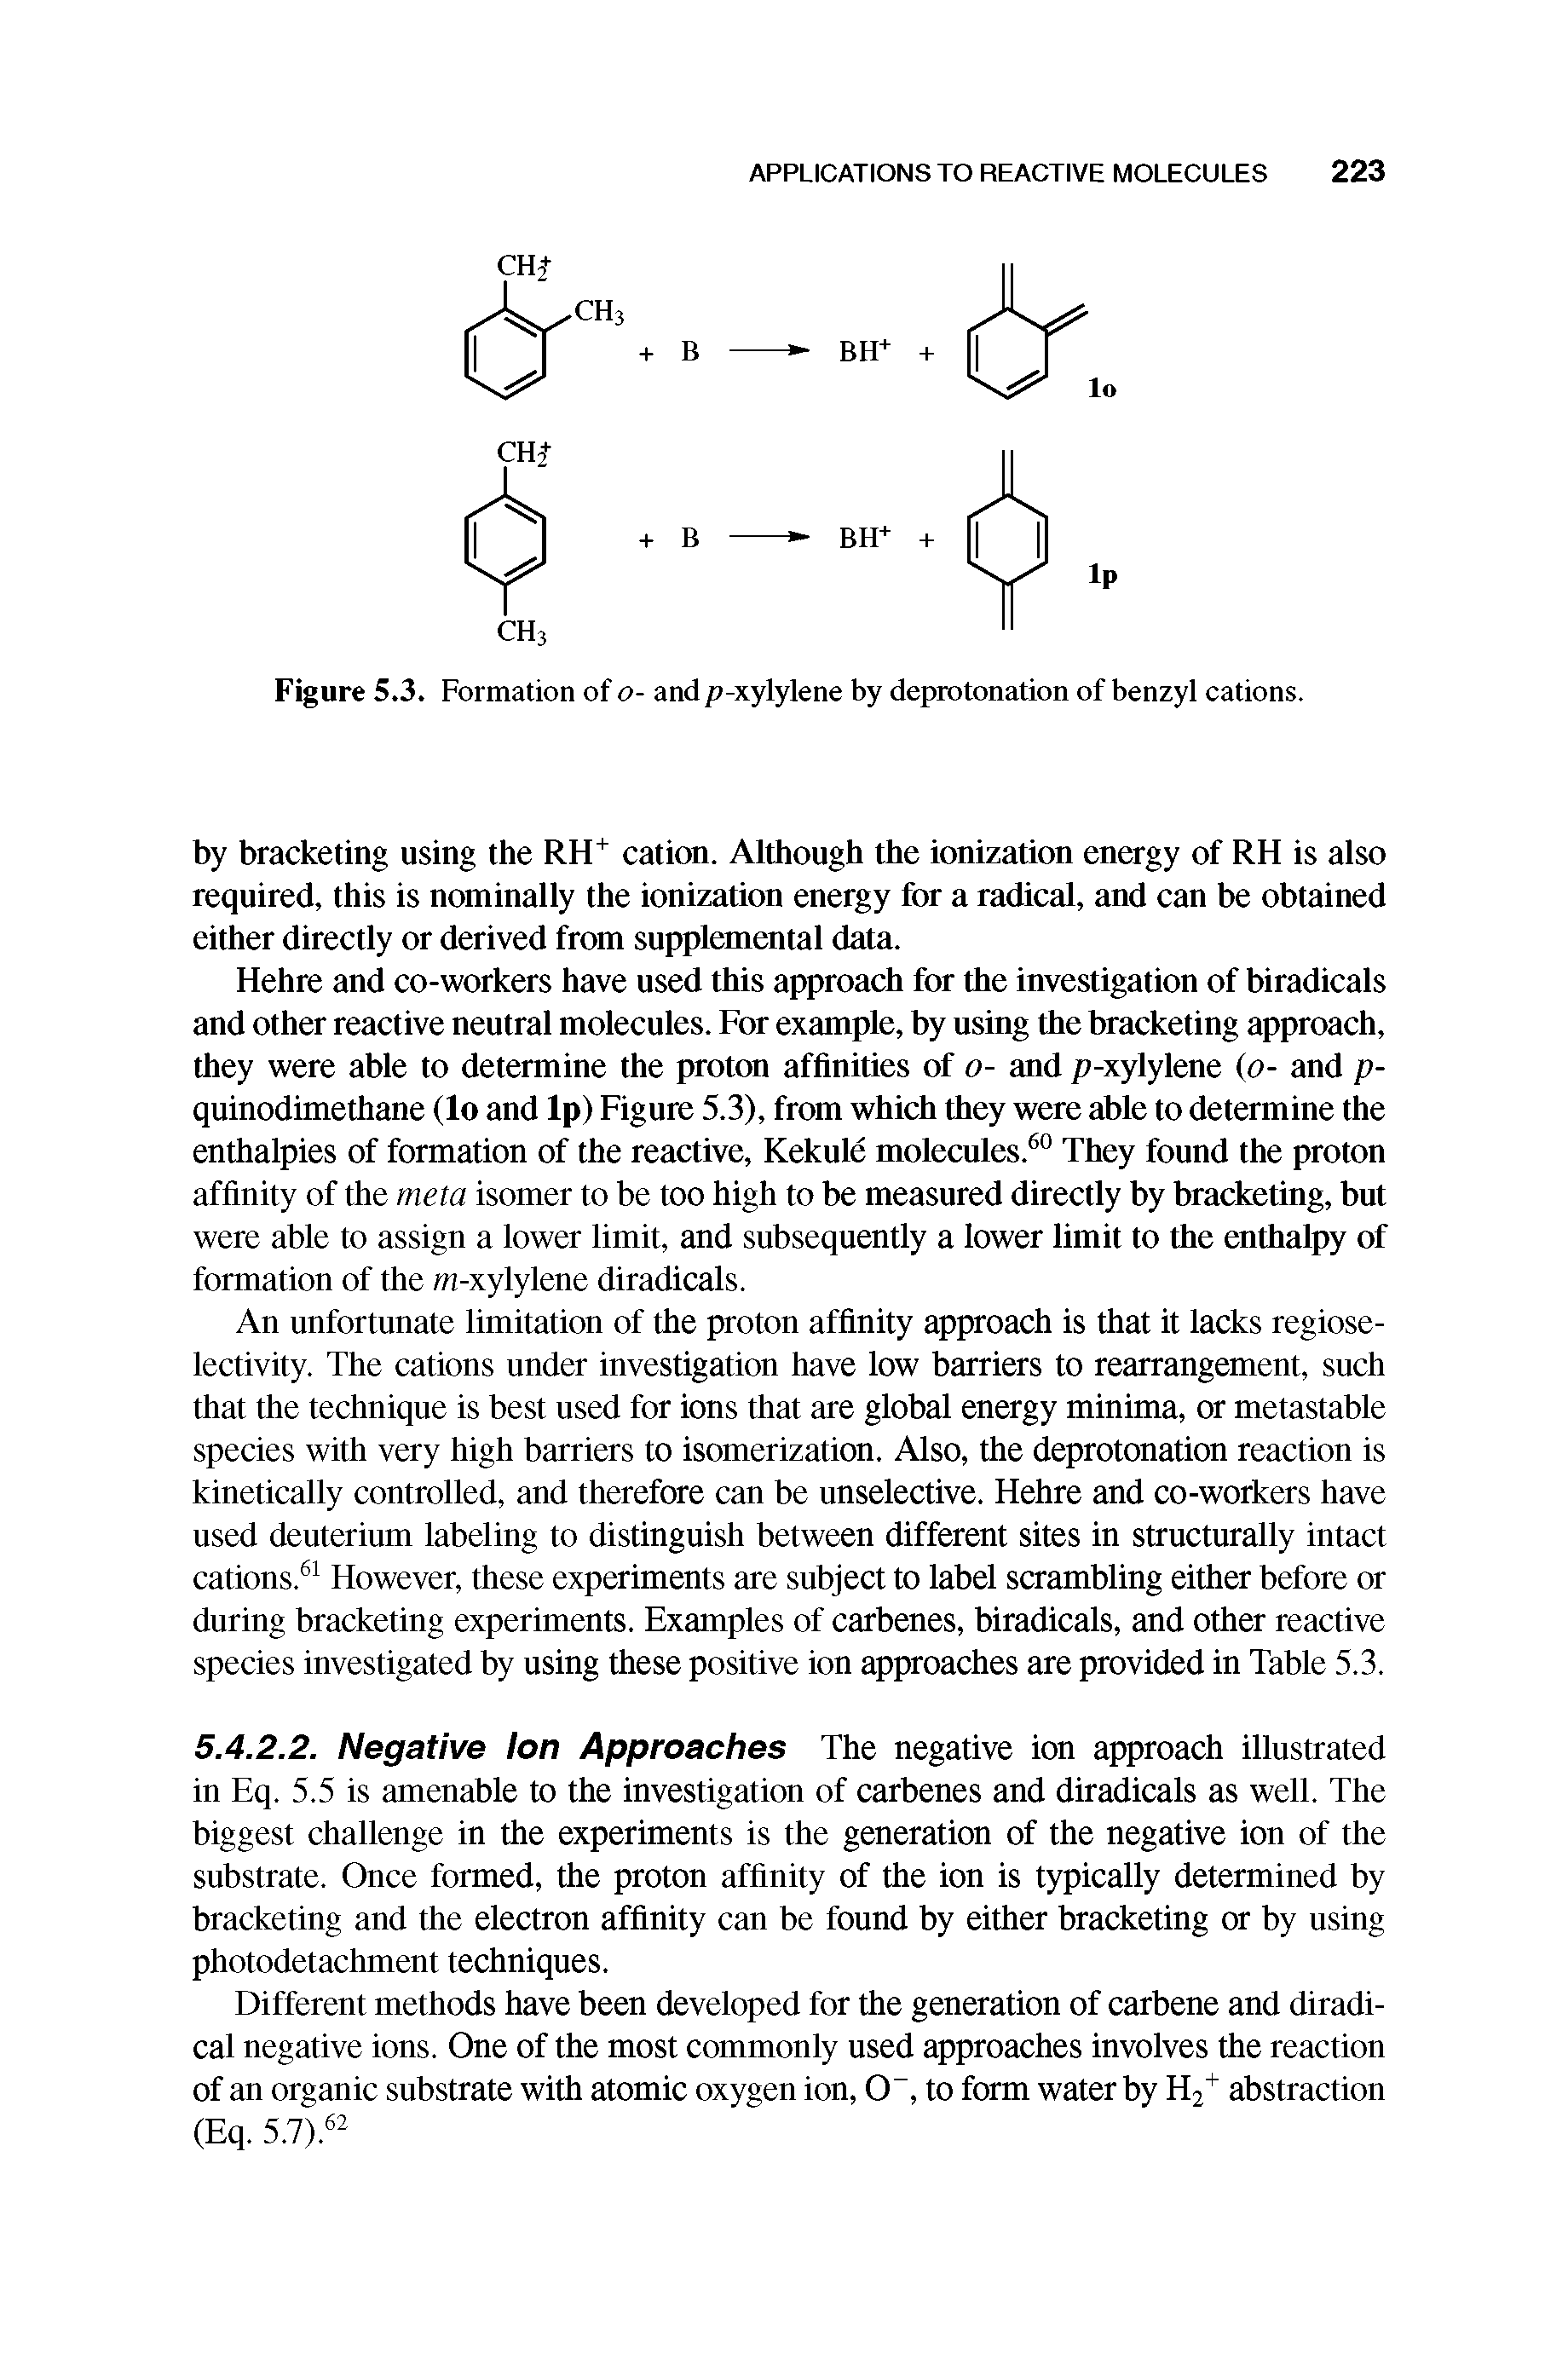 Figure 5.3. Formation of o- and p-xylylene by deprotonation of benzyl cations.